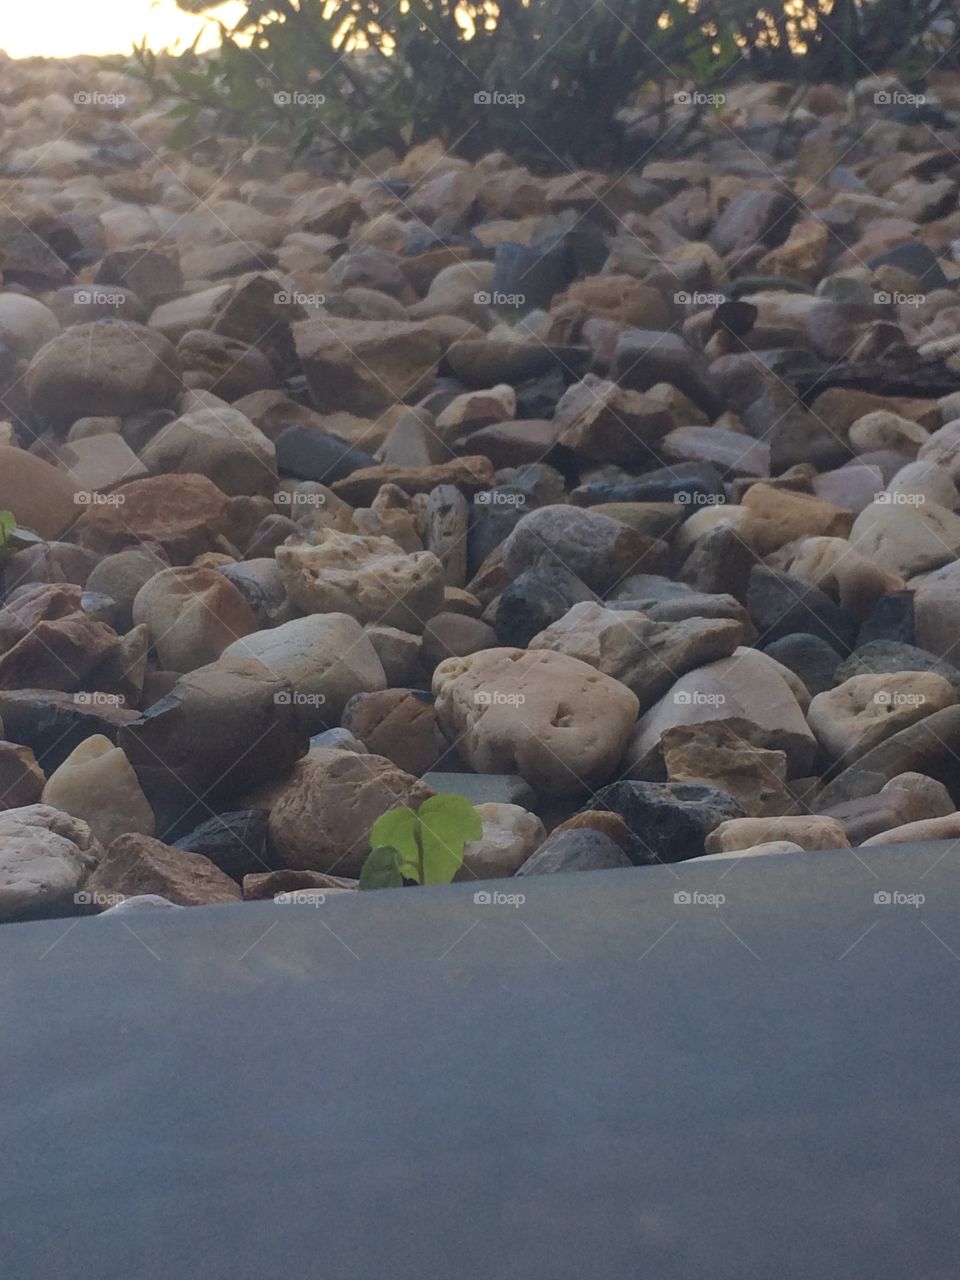 Lone sprout